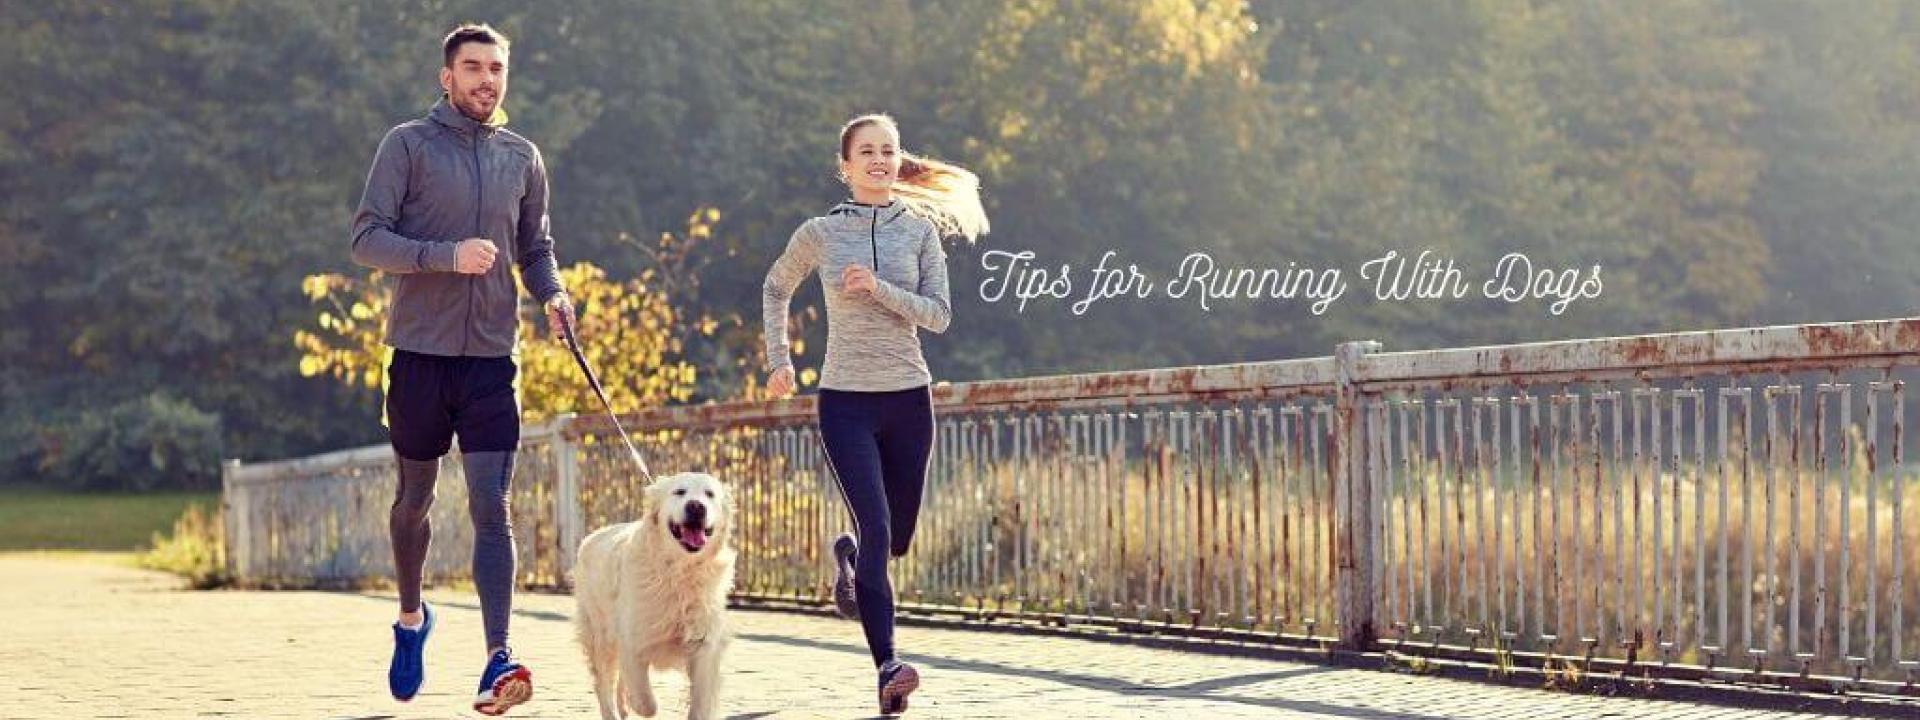 Tips for running with dogs